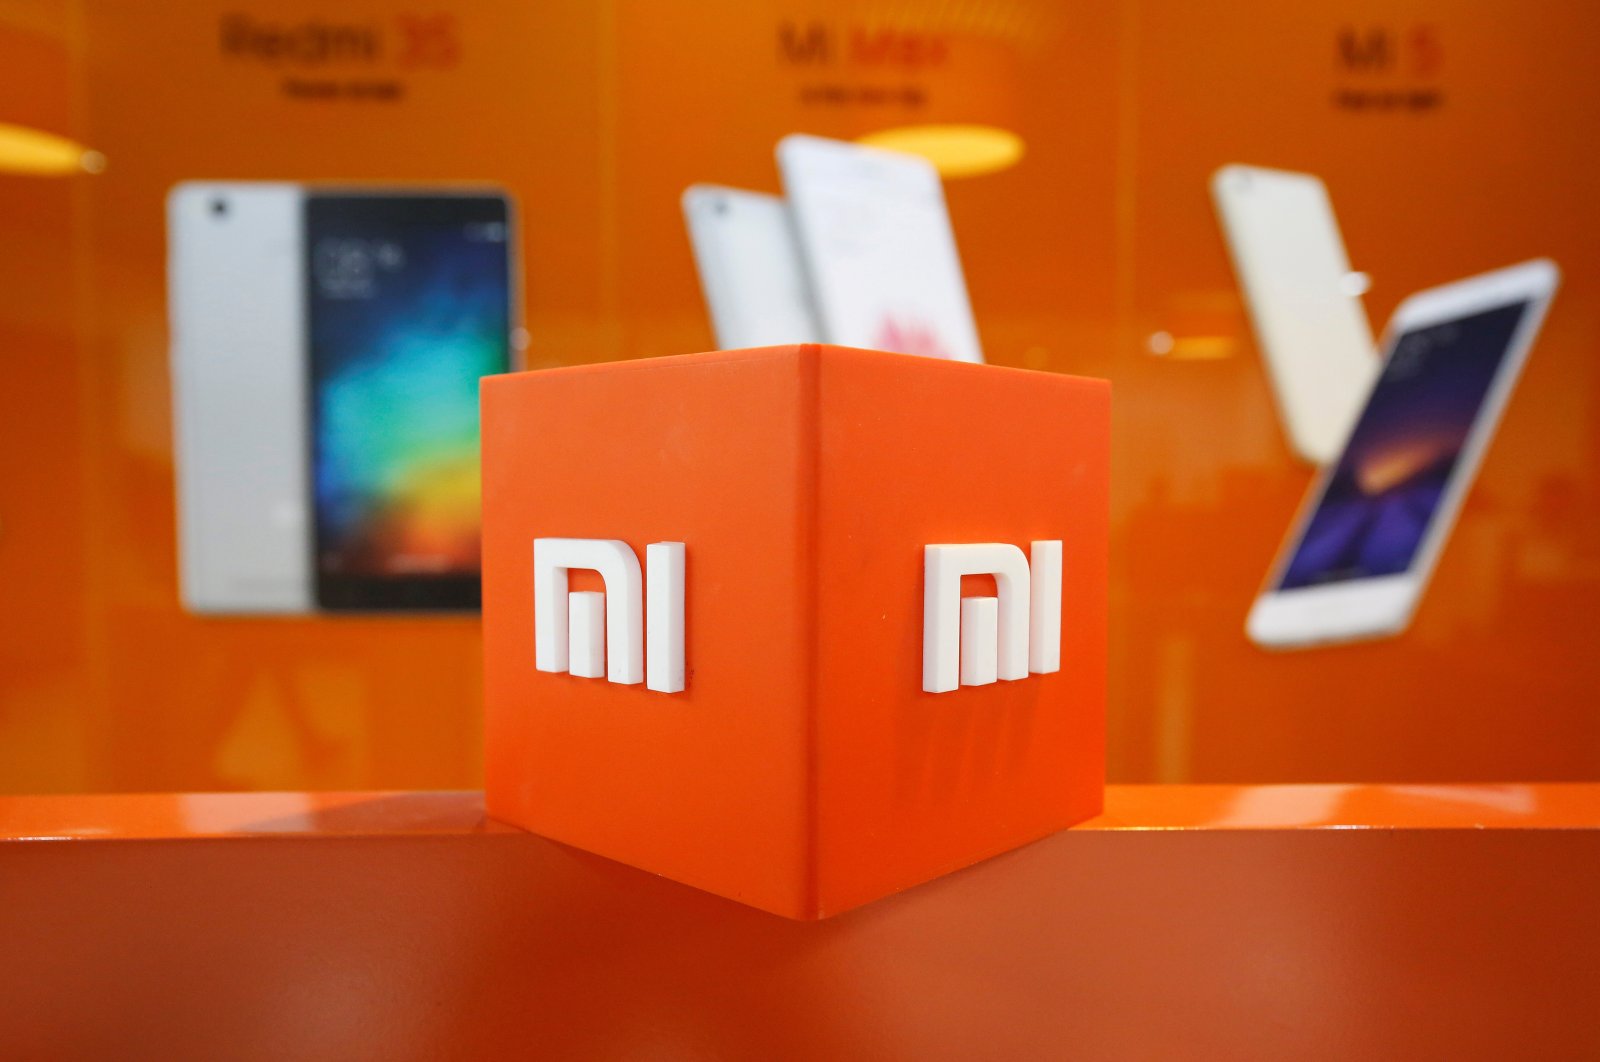 The logo of Xiaomi is seen inside the company's office in Bengaluru, India, Jan. 18, 2018. (Reuters Photo)